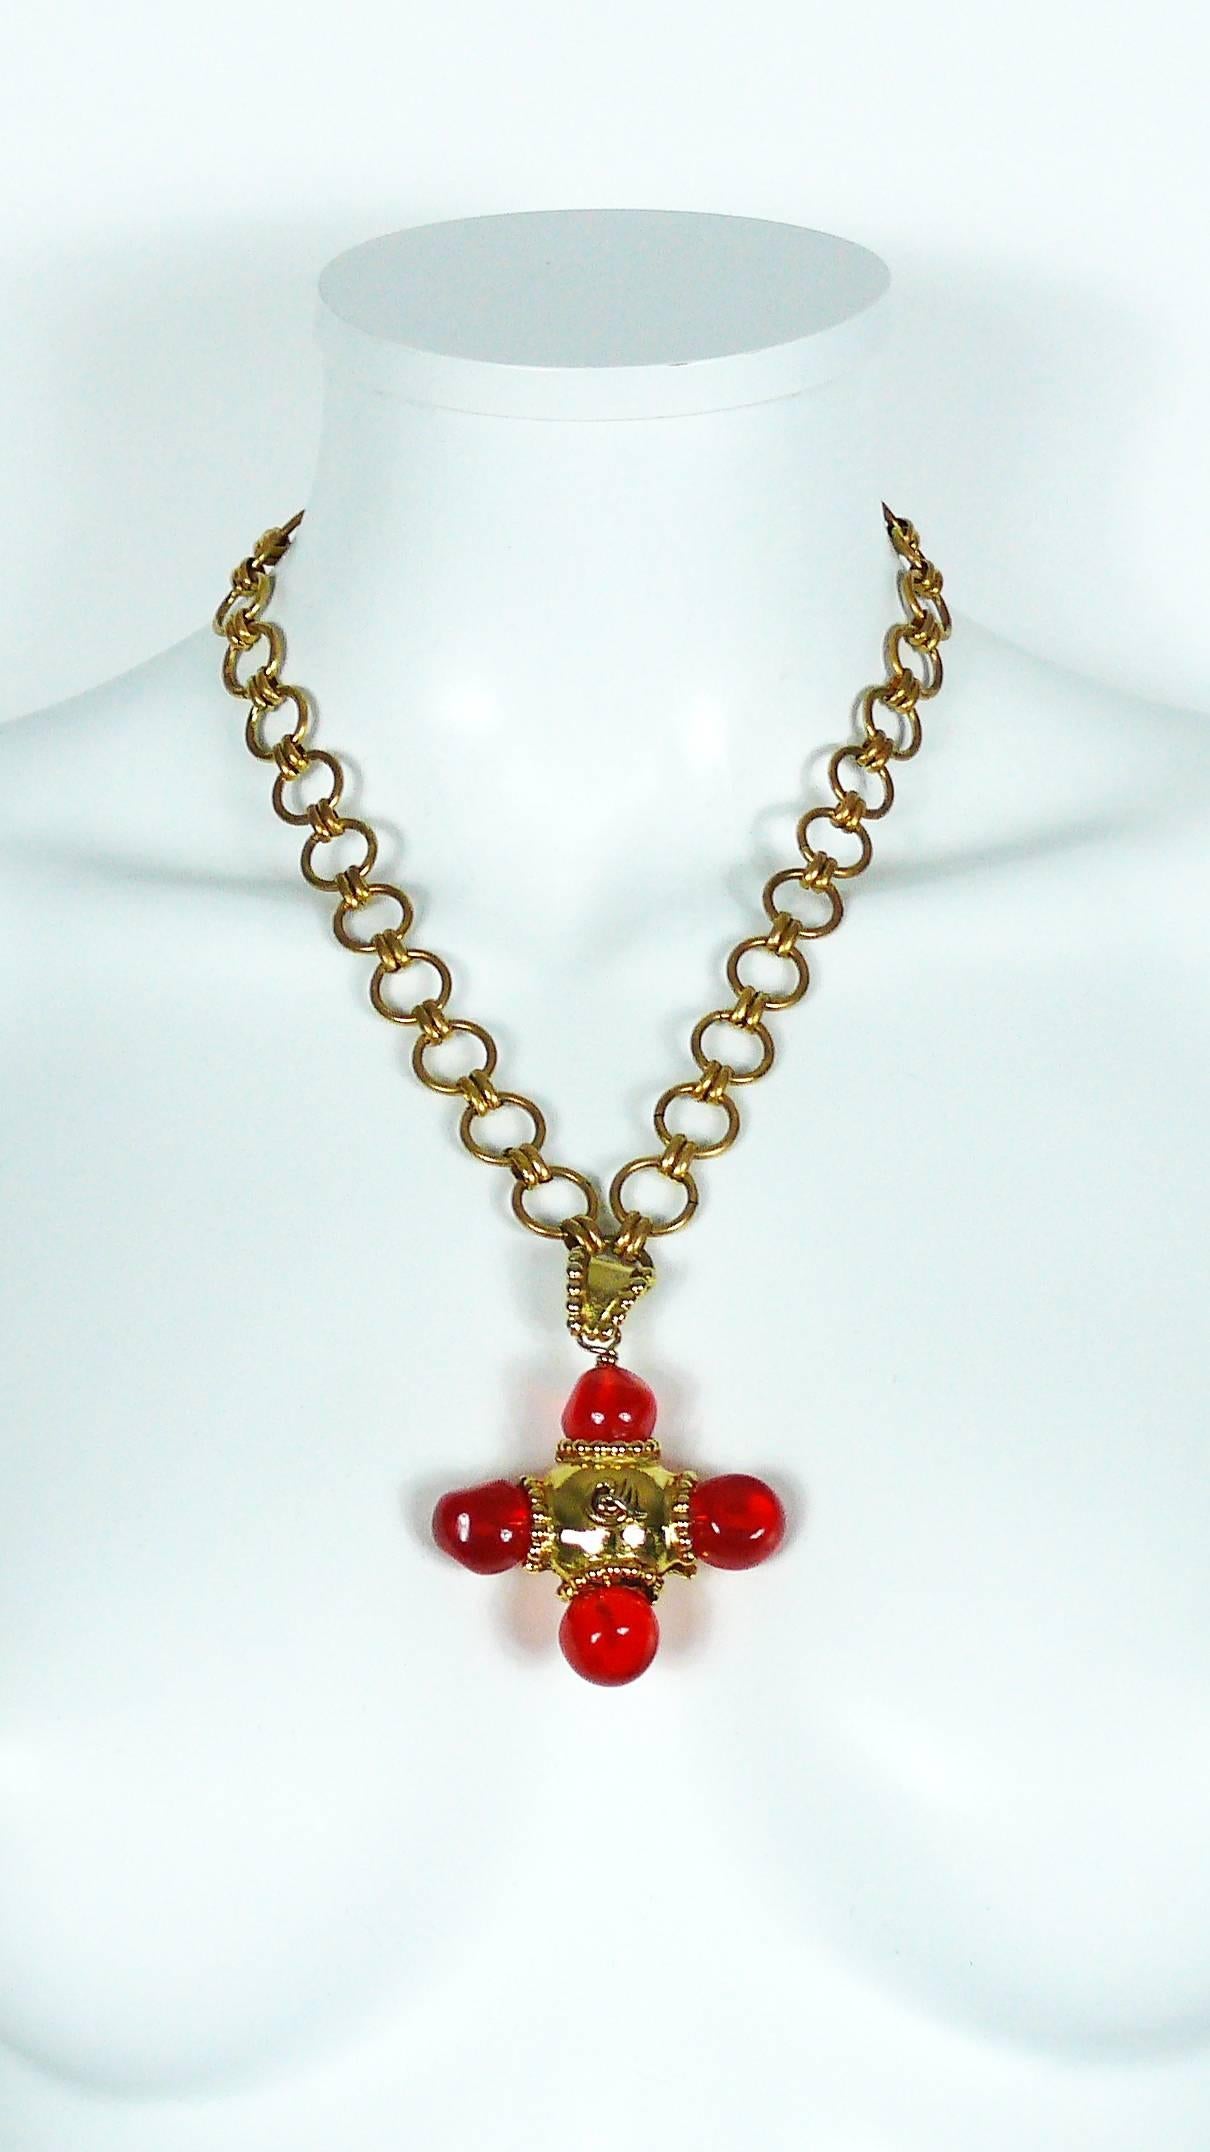 CHRISTIAN LACROIX vintage gold tone chain necklace featuring a cross pendant embellished with orange resin cabochons.

Marked CHRISTIAN LACROIX CL Made in France.

Indicative measurements : total length approx. 51 cm (20.08 inches) / adjustable